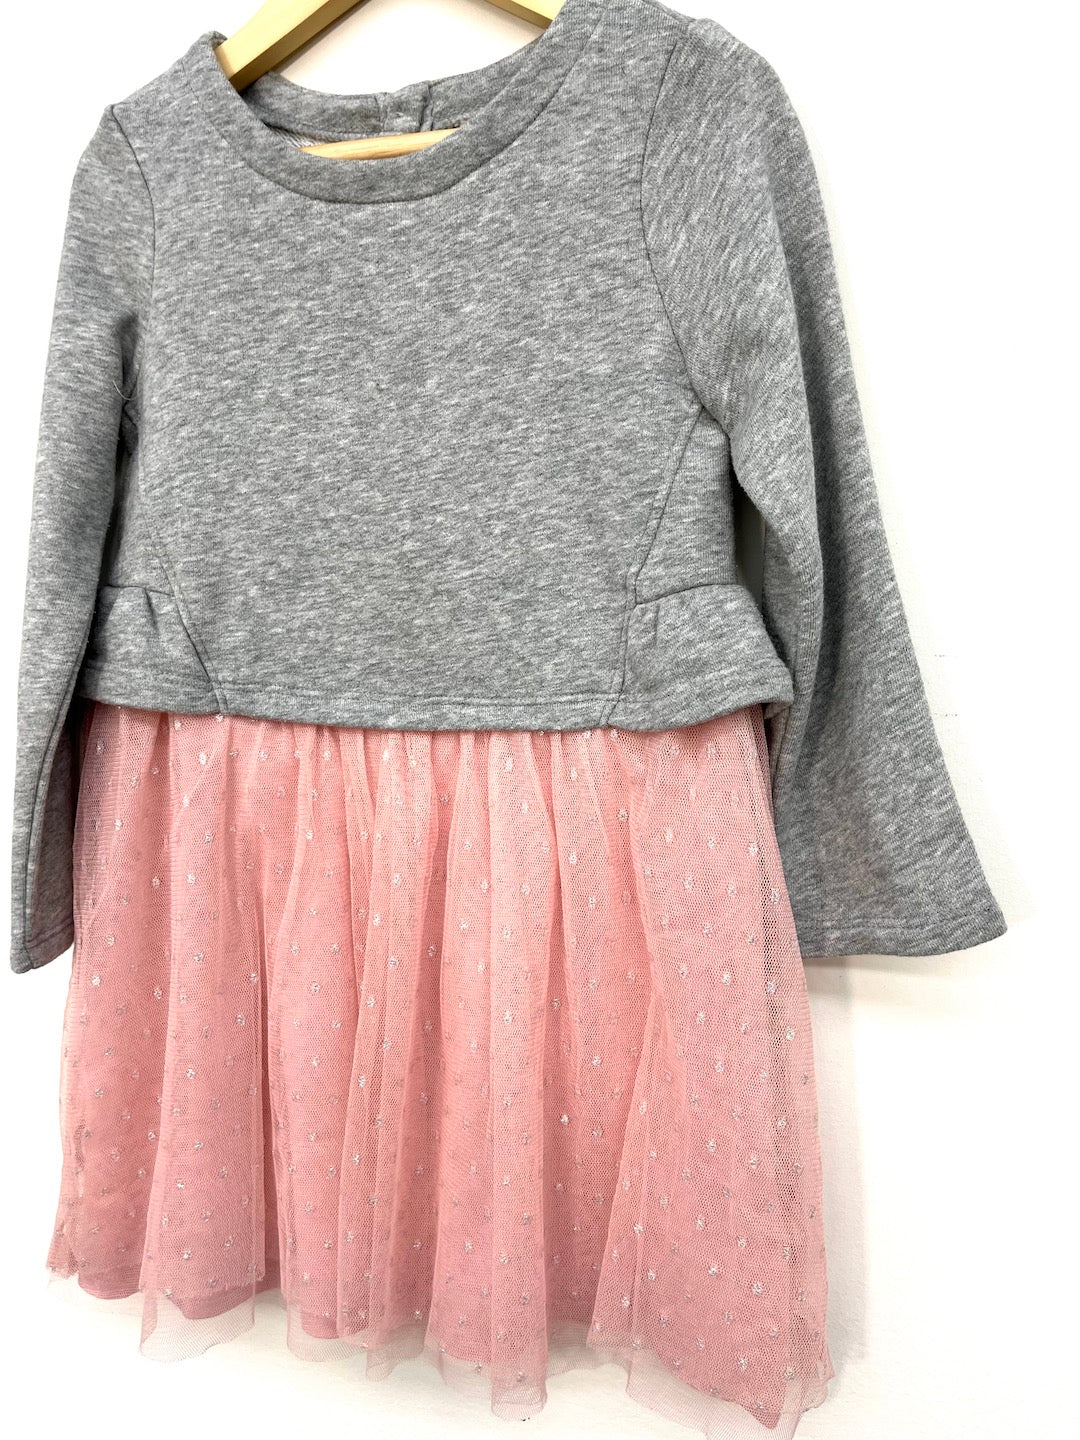 gap grey long sleeve dress with pink tulle 4T